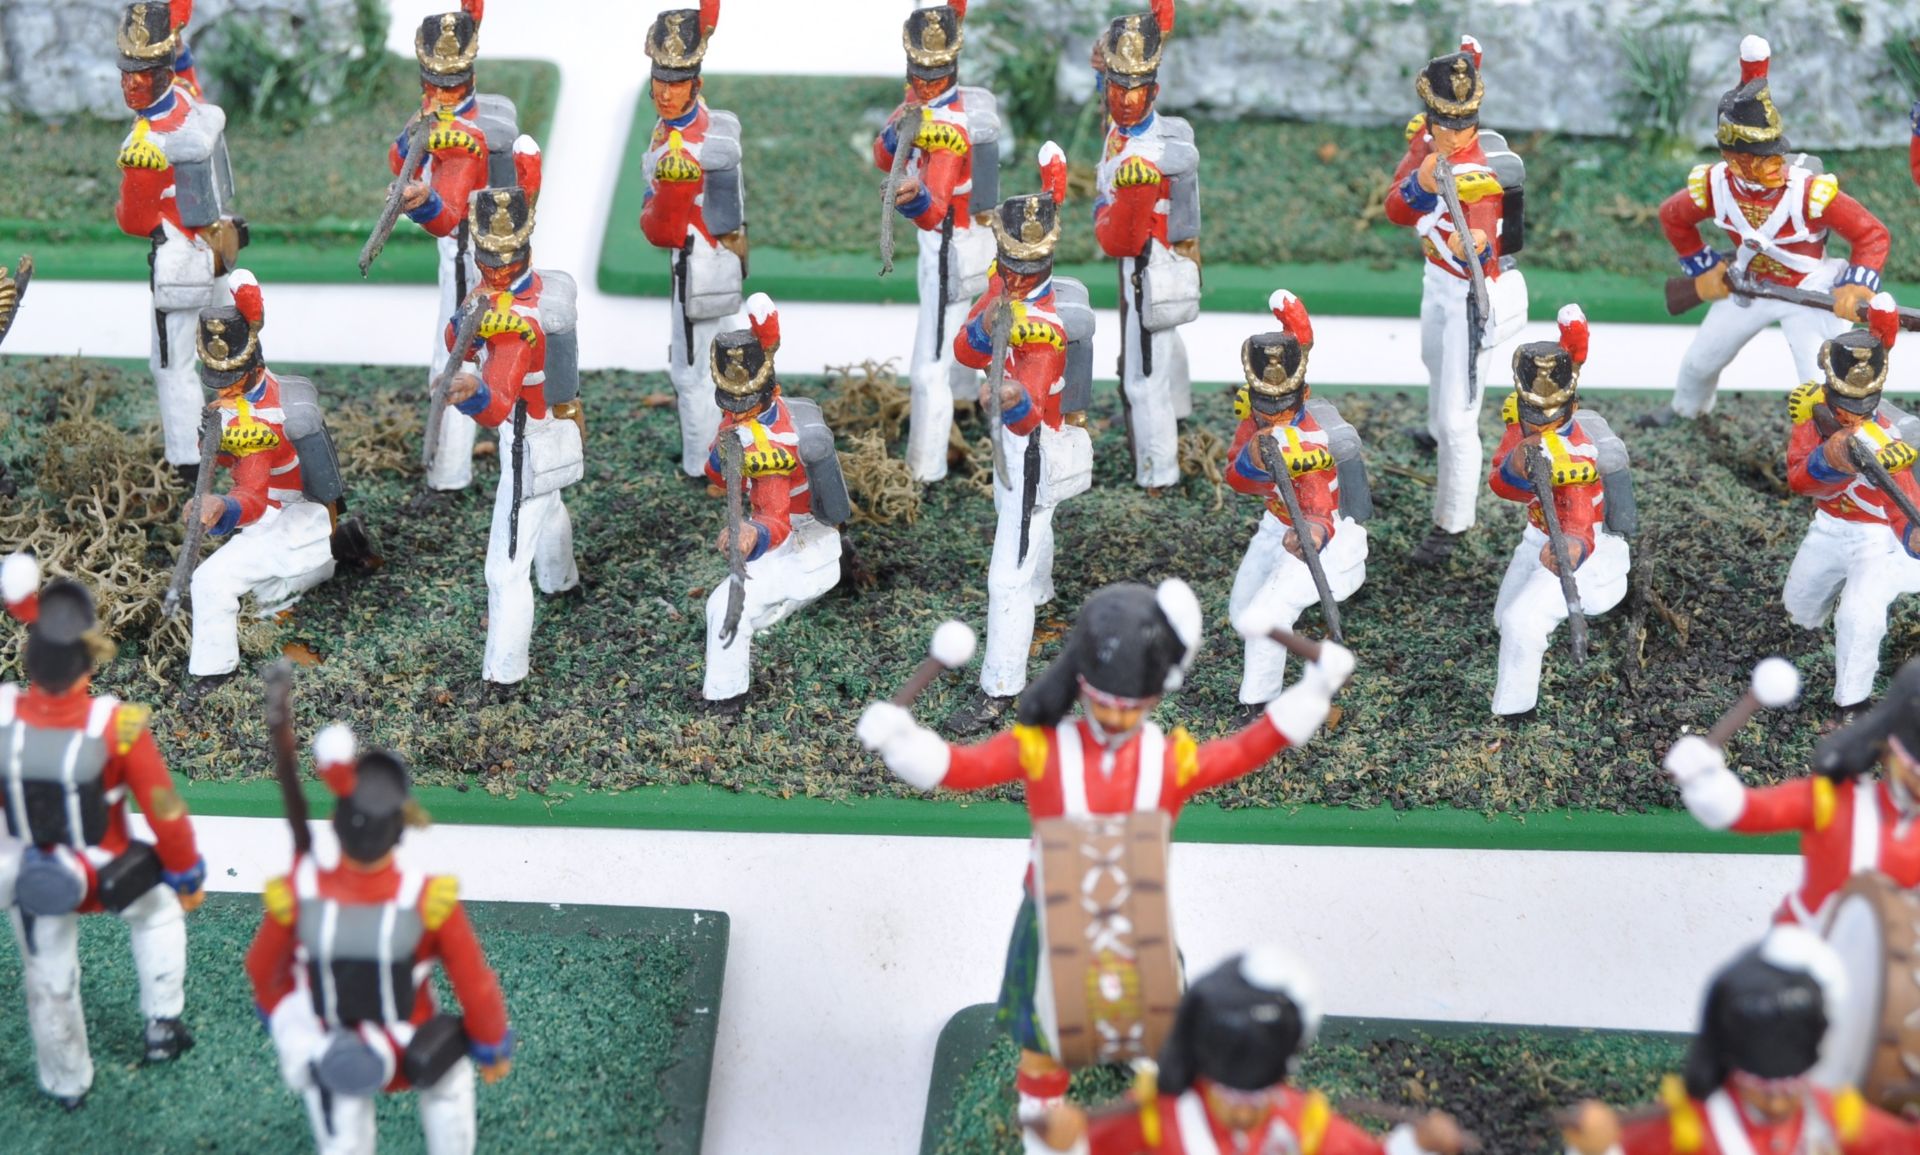 COLLECTION OF 1/32 SCALE PLASTIC NAPOLEONIC SOLDIER FIGURES - Image 3 of 6